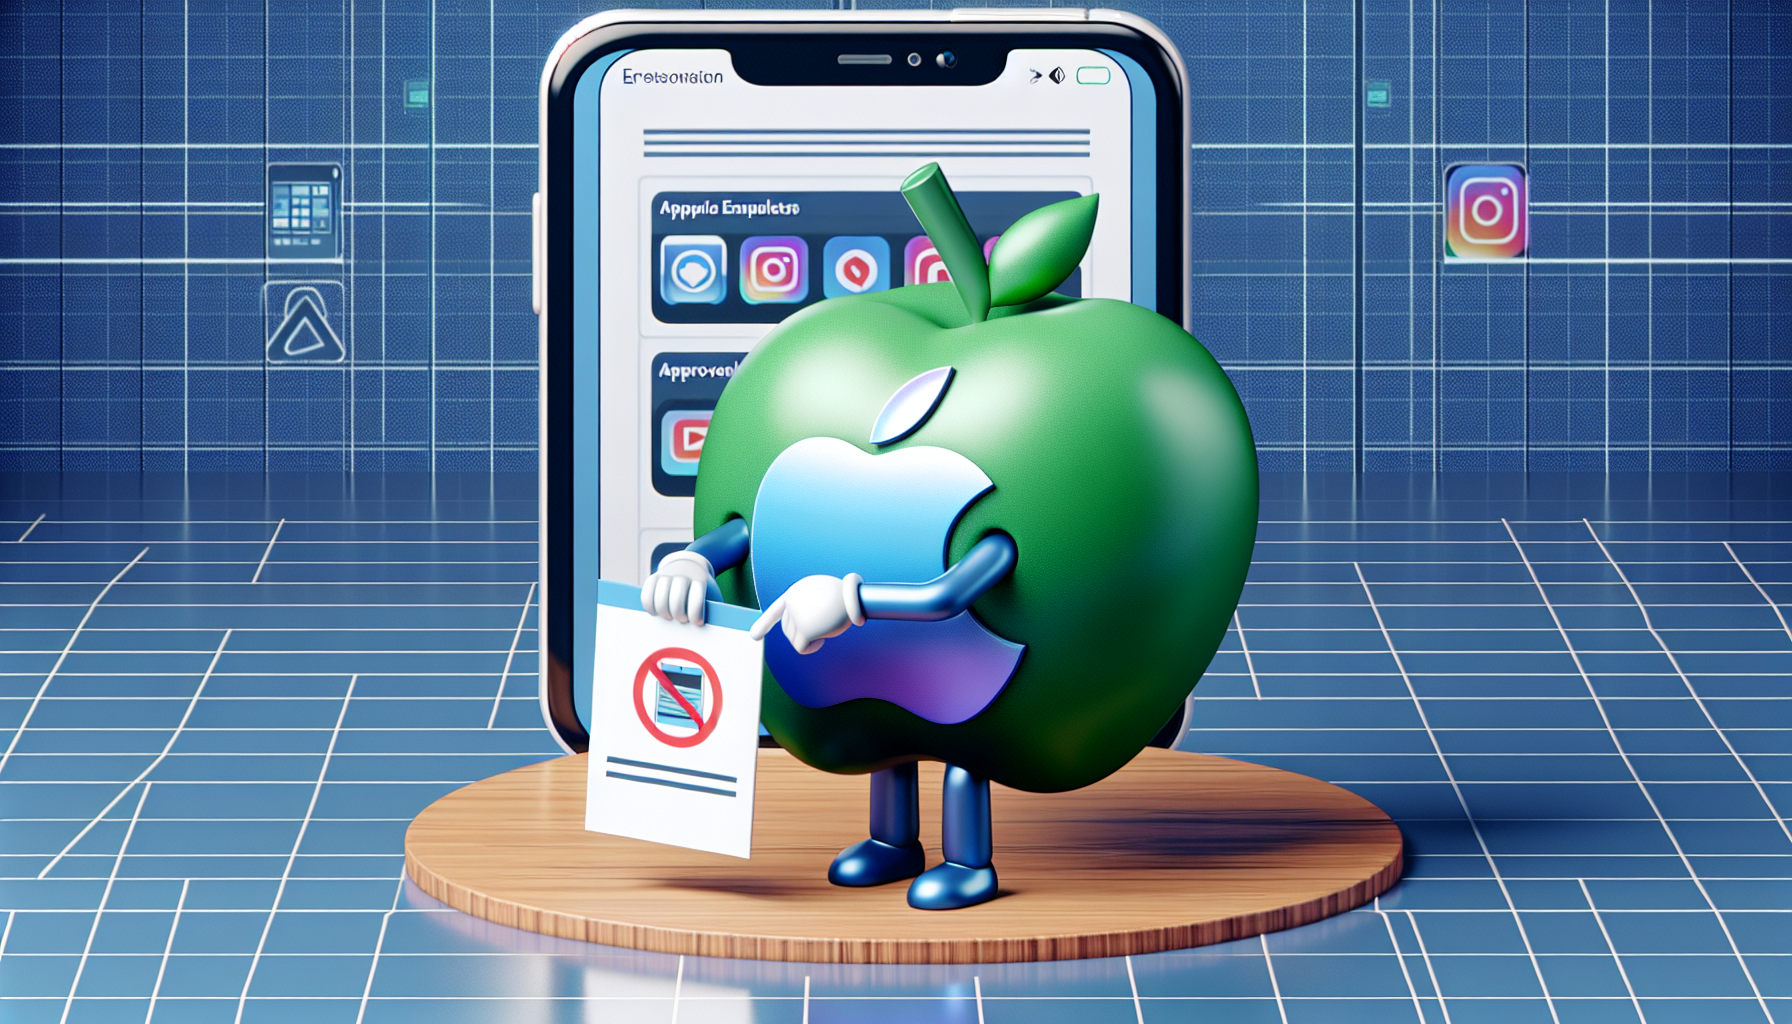 Apple Rejects Approval for PC Emulators on iOS App Store